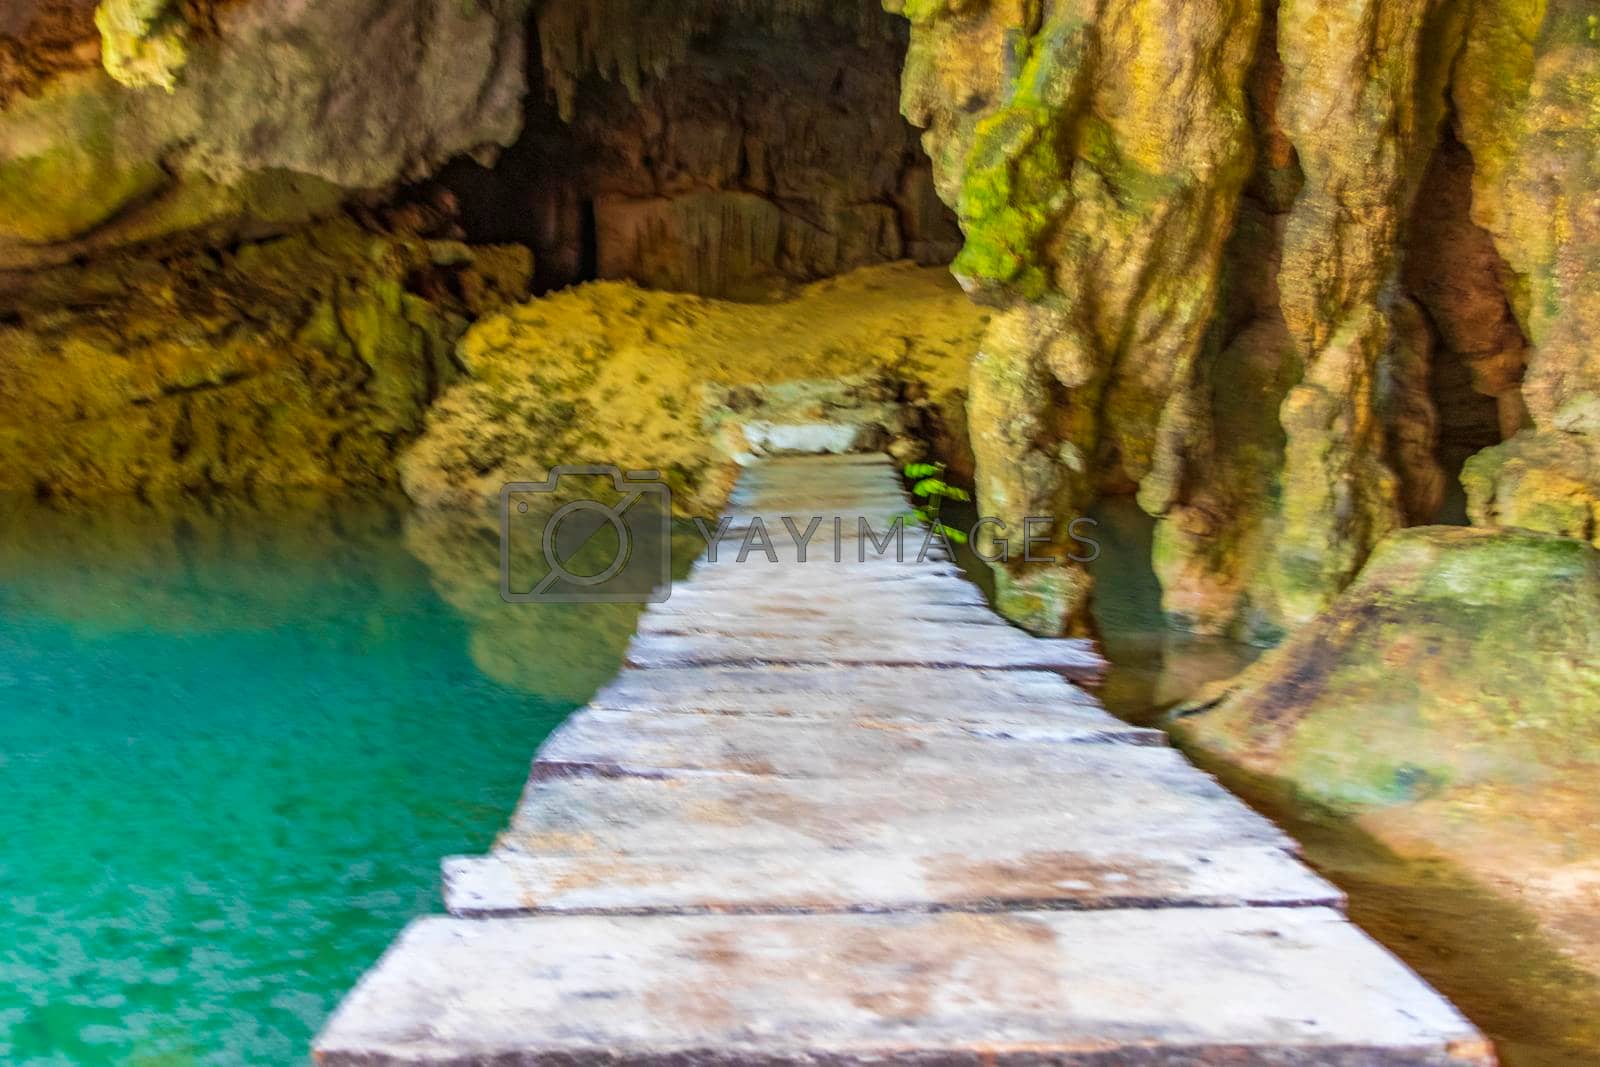 Royalty free image of Amazing blue turquoise water and limestone cave sinkhole cenote Mexico. by Arkadij